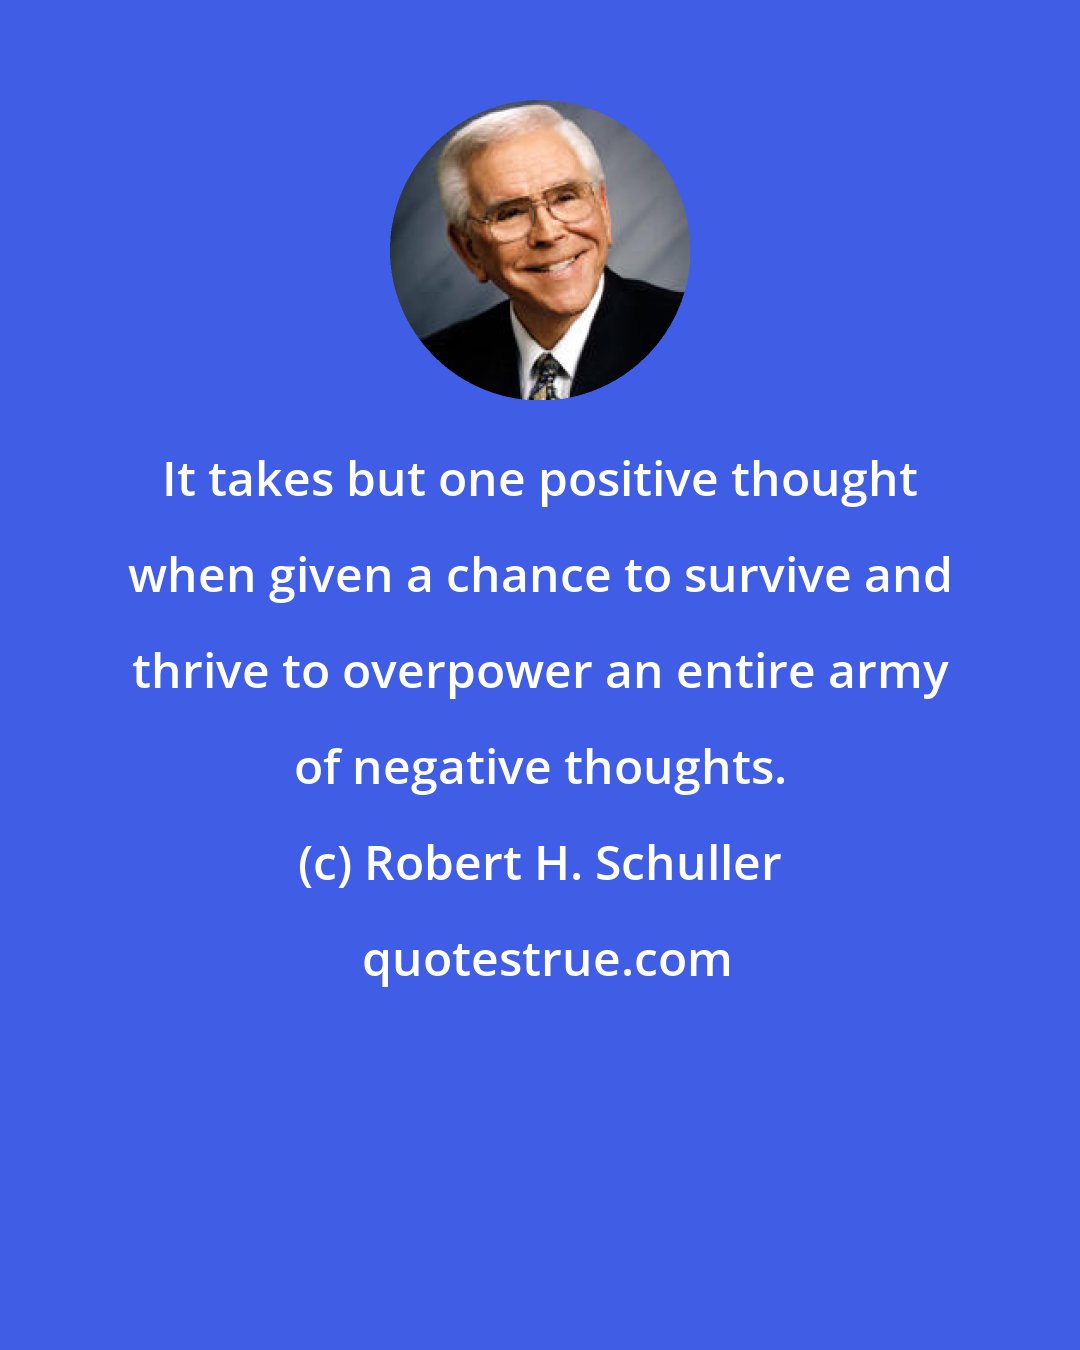 Robert H. Schuller: It takes but one positive thought when given a chance to survive and thrive to overpower an entire army of negative thoughts.